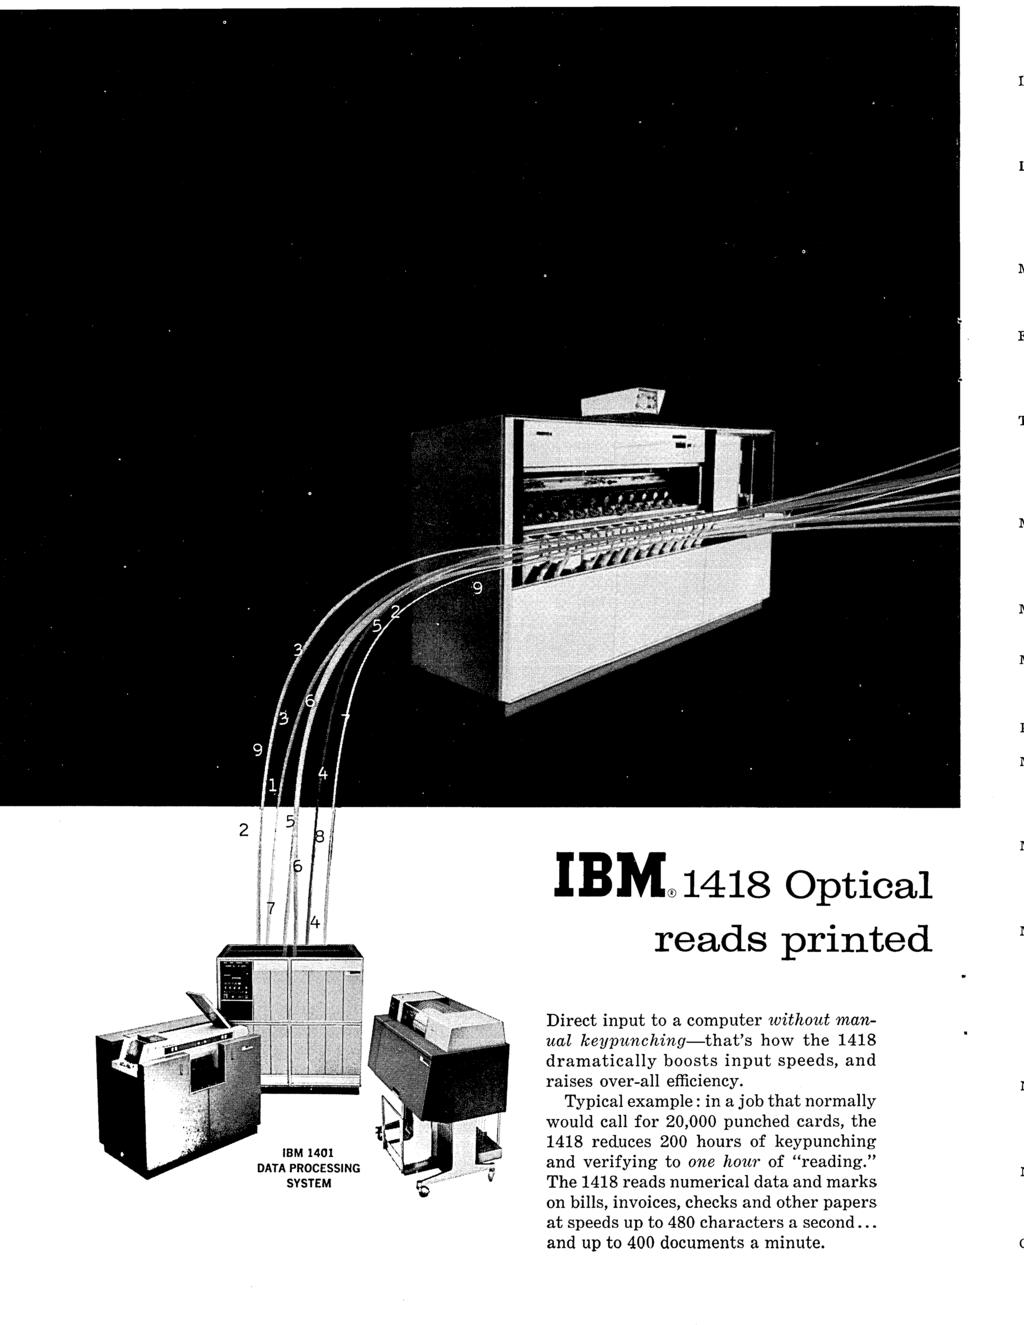 '] I I IBM 1418 Optical reads printed IBM 1401 DATA PROCESSING SYSTEM Direct input to a computer without manual keypunching-that's how the 1418 dramatically boosts input speeds, and raises over-all